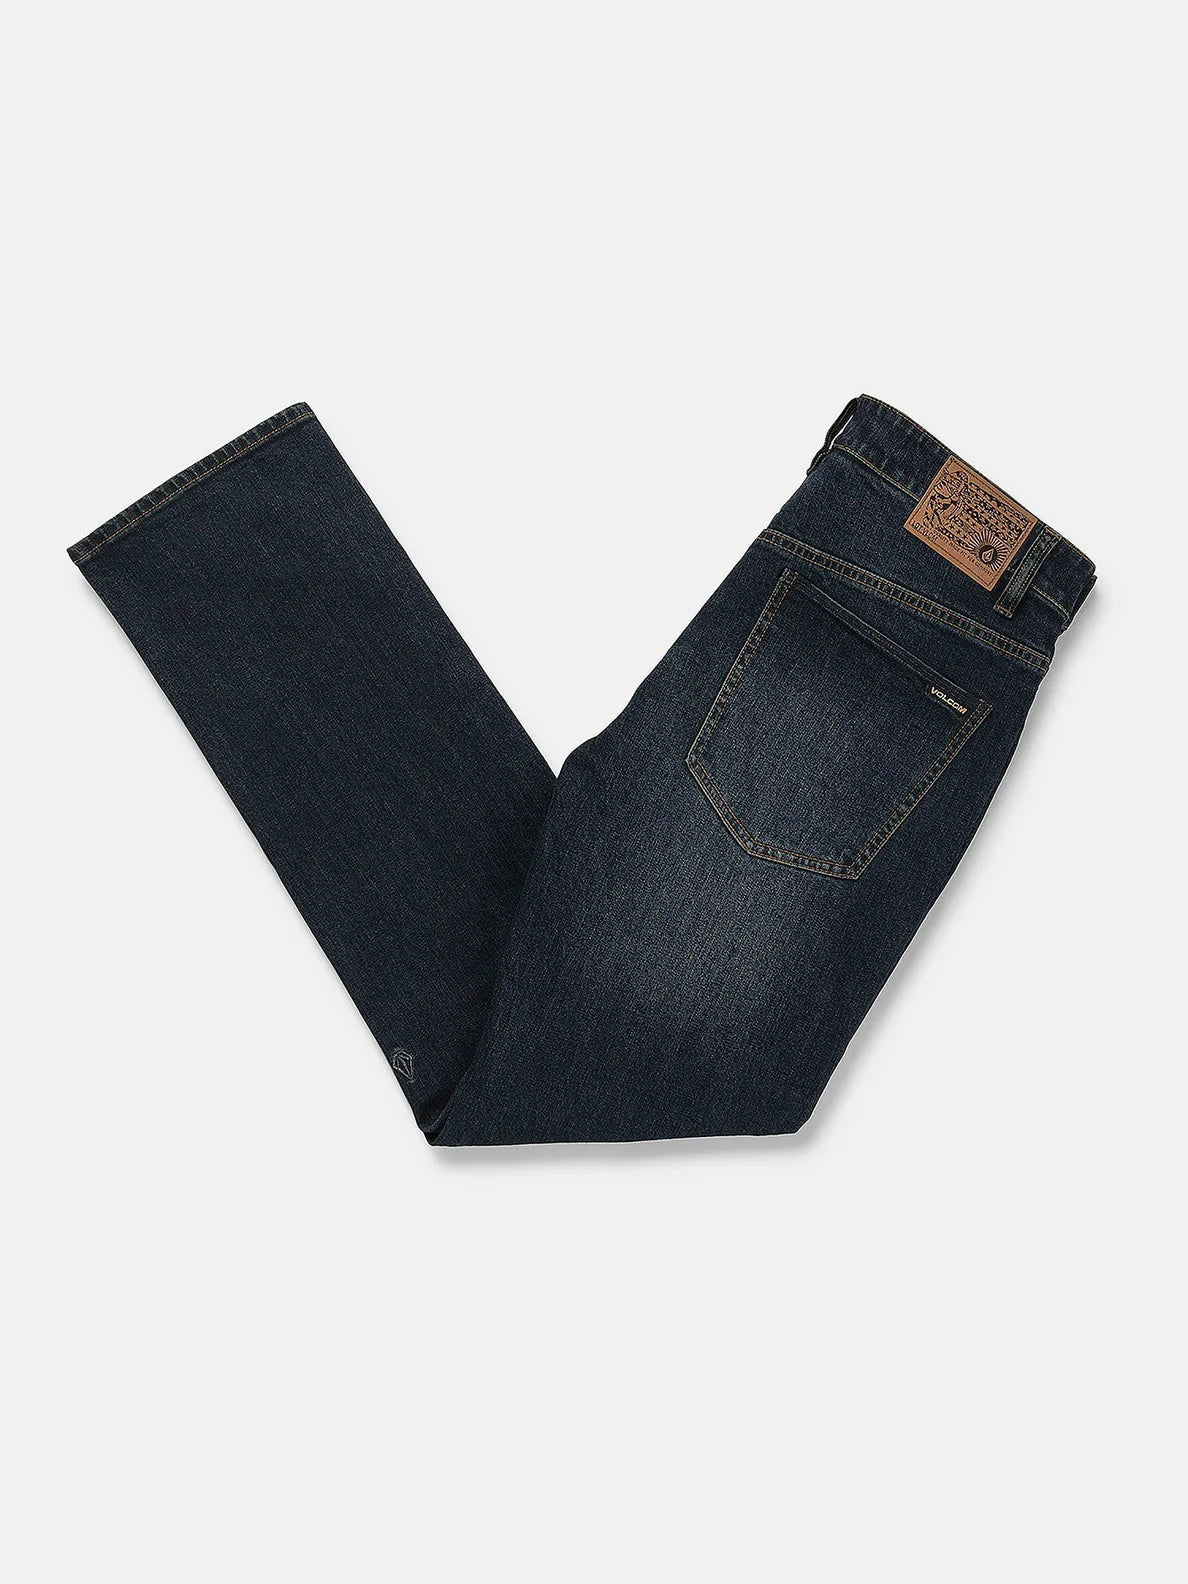 Volcom - Solver Denim Jeans | New Vintage Blue -  - Married to the Sea Surf Shop - 